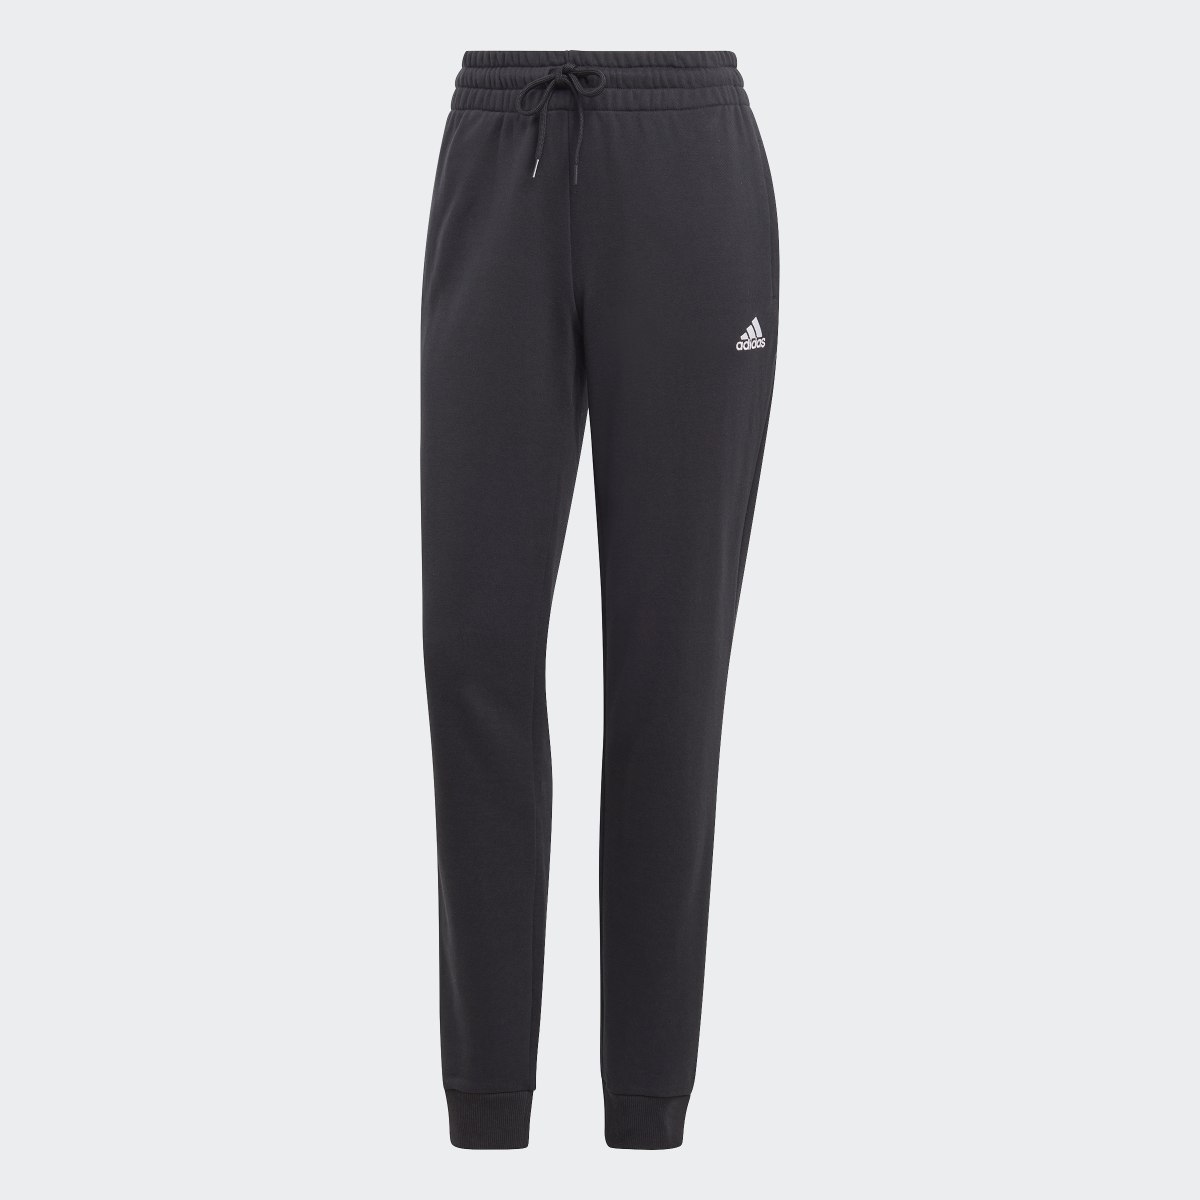 Adidas Essentials Linear French Terry Cuffed Pants. 4